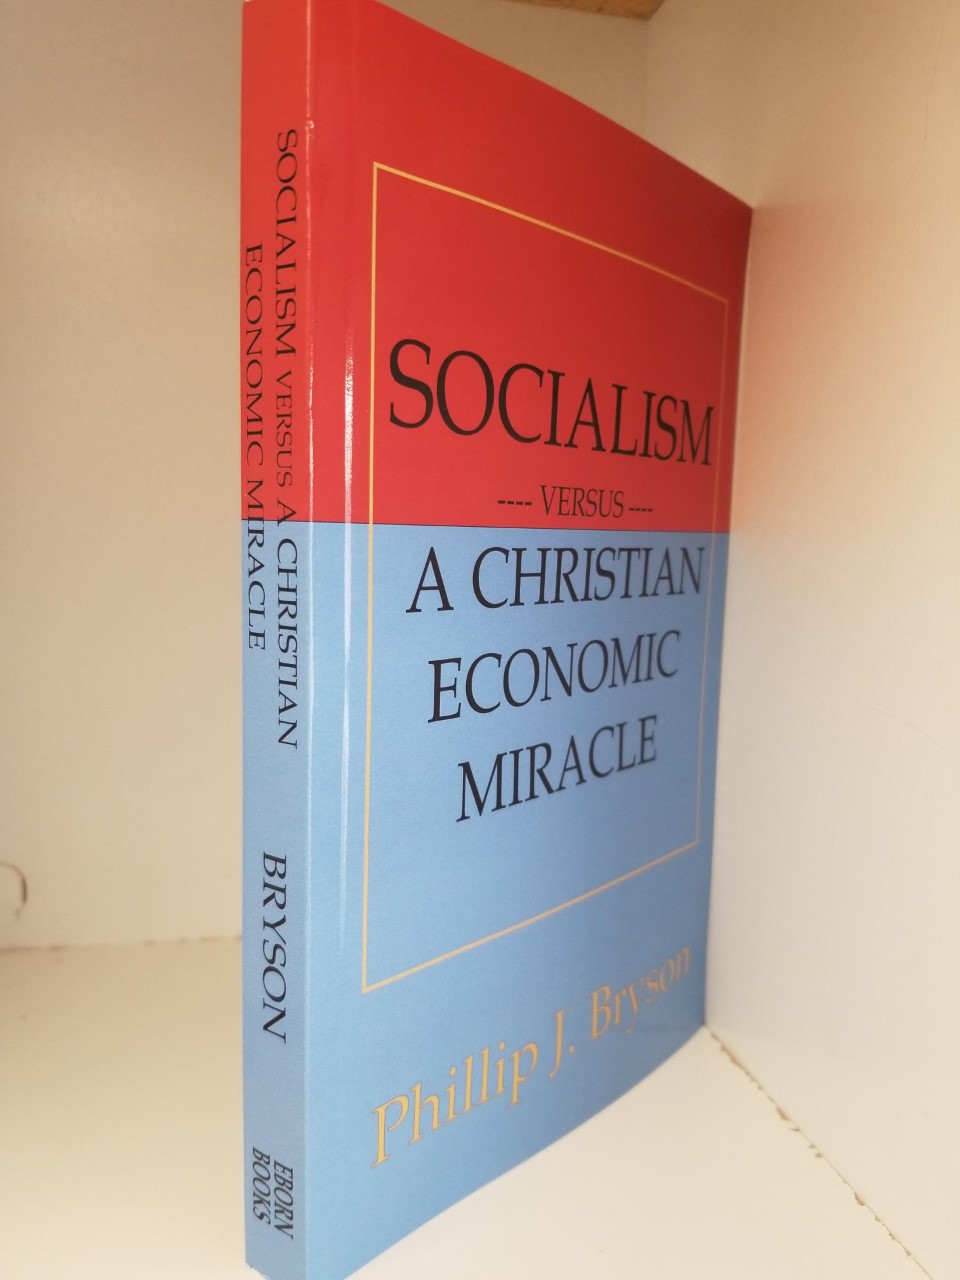 Economic　Eborn　In:　J.　A　Softbound　Miracle　Socialism　versus　Bryson　Just　Phillip　Books　Book　LDS　New　Christian